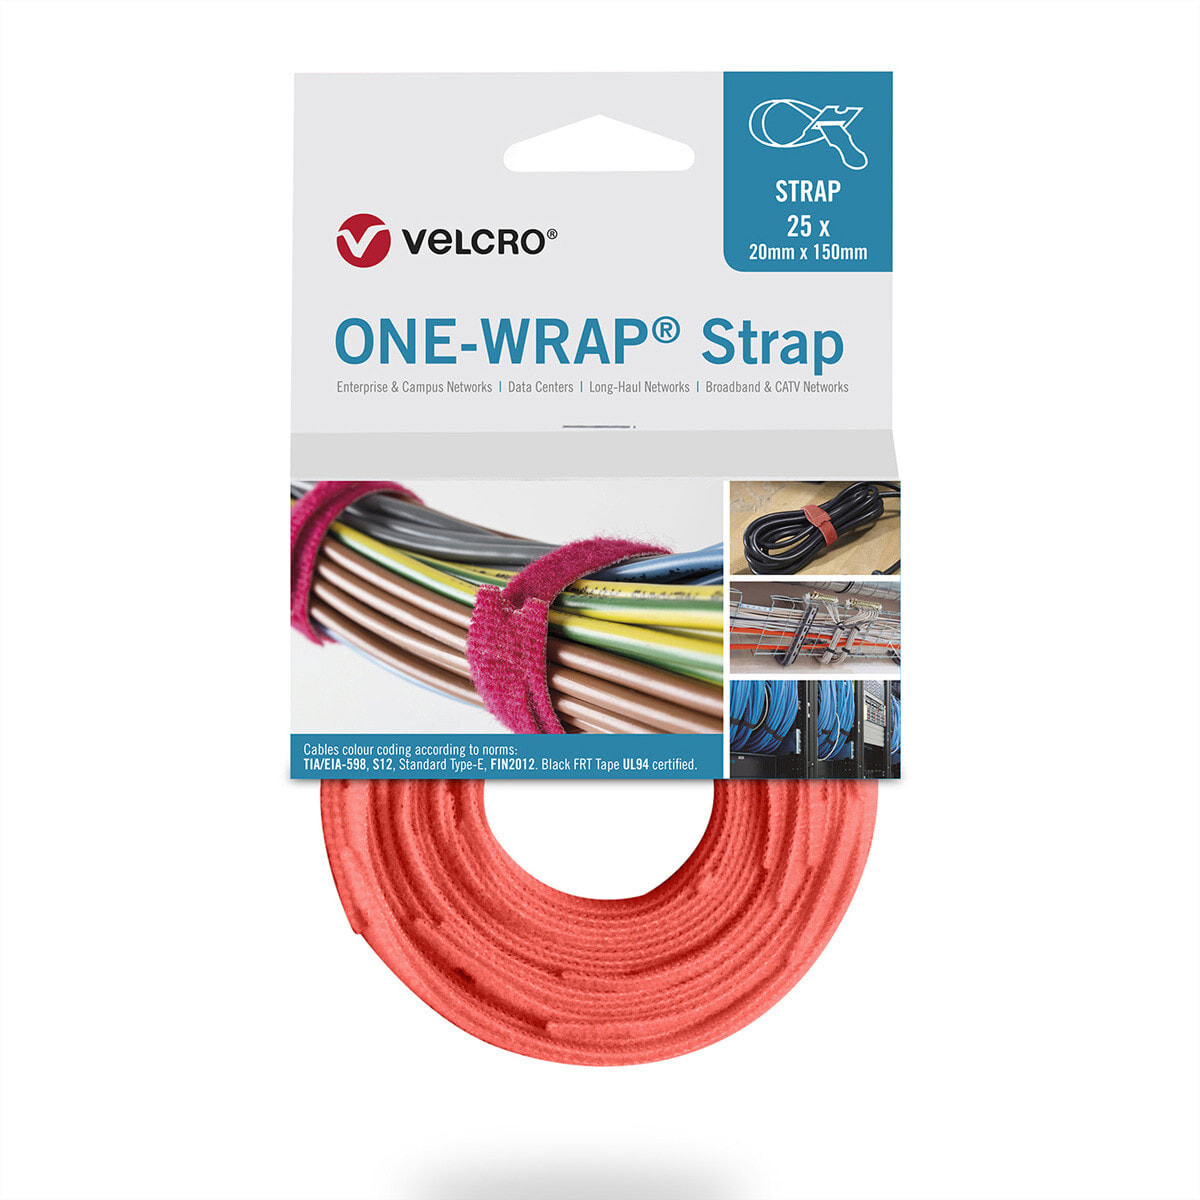 VELCRO ONE-WRAP - Releasable cable tie - Polypropylene (PP) -  - Orange - 200 mm - 20 mm - 25 pc(s)